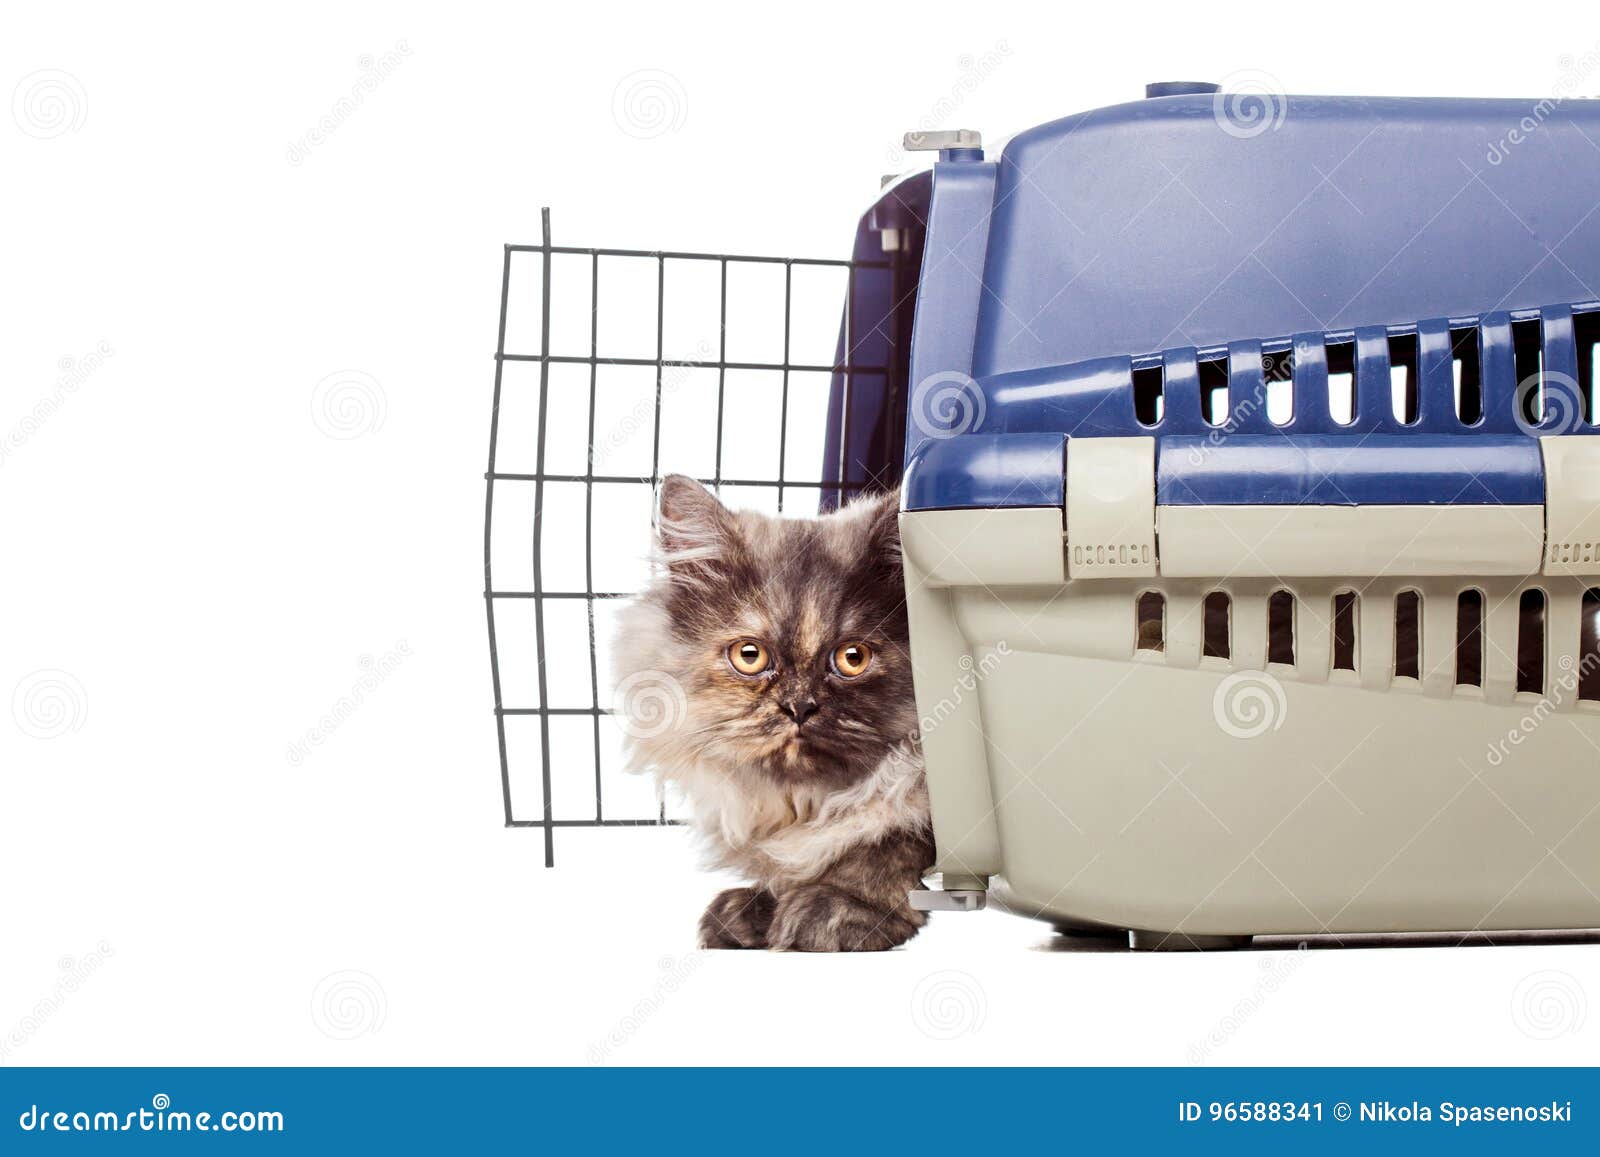 Chinchilla Persian Cat In A Pet Cage Stock Image Image